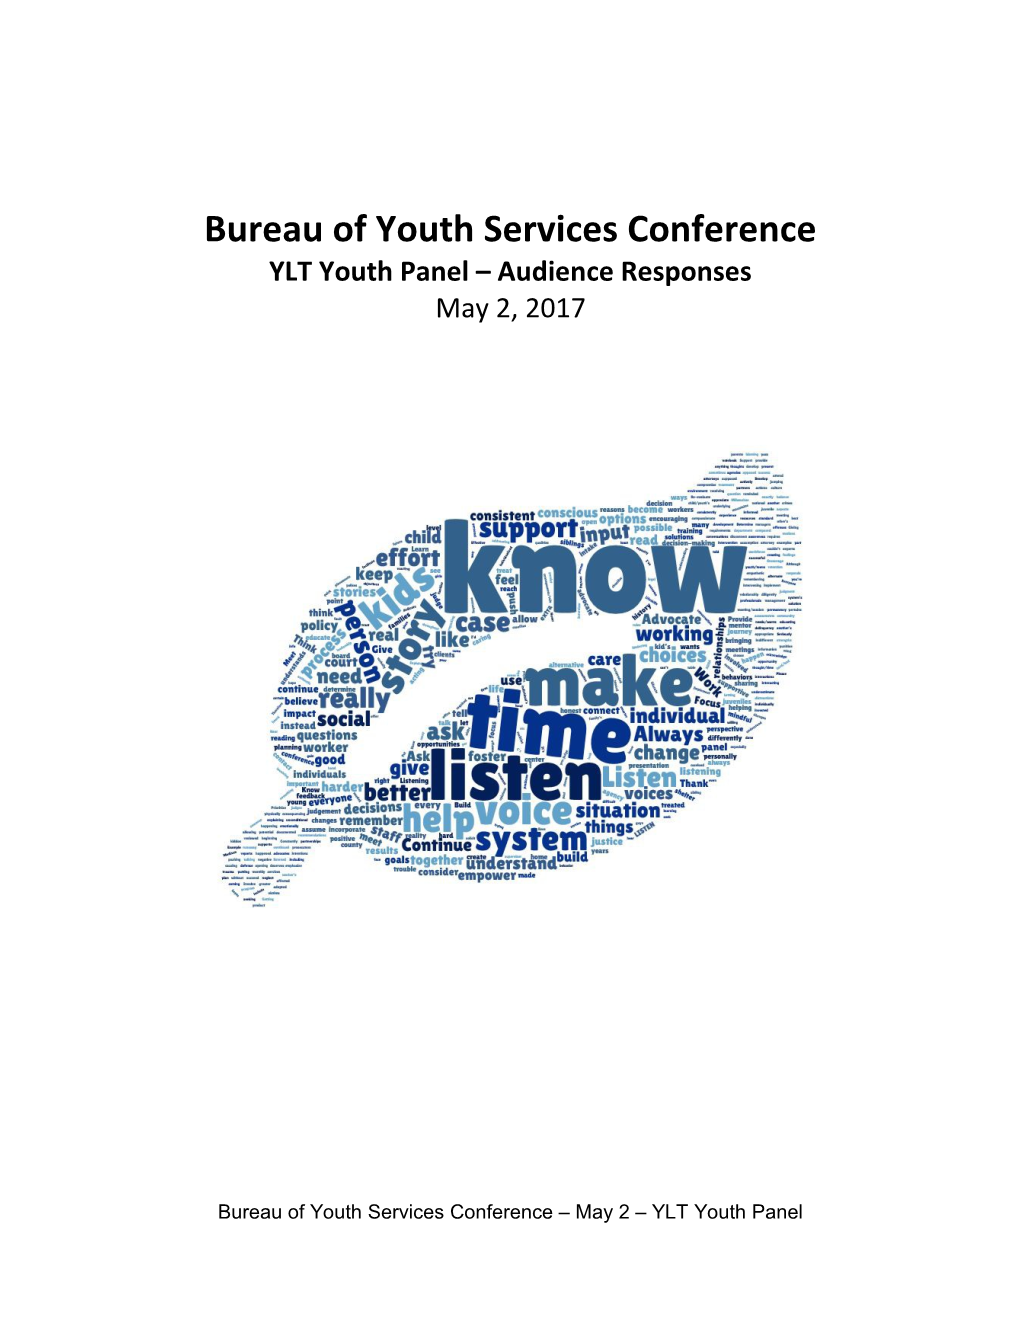 Bureau of Youth Services Conference YLT Youth Panel Audience Responses